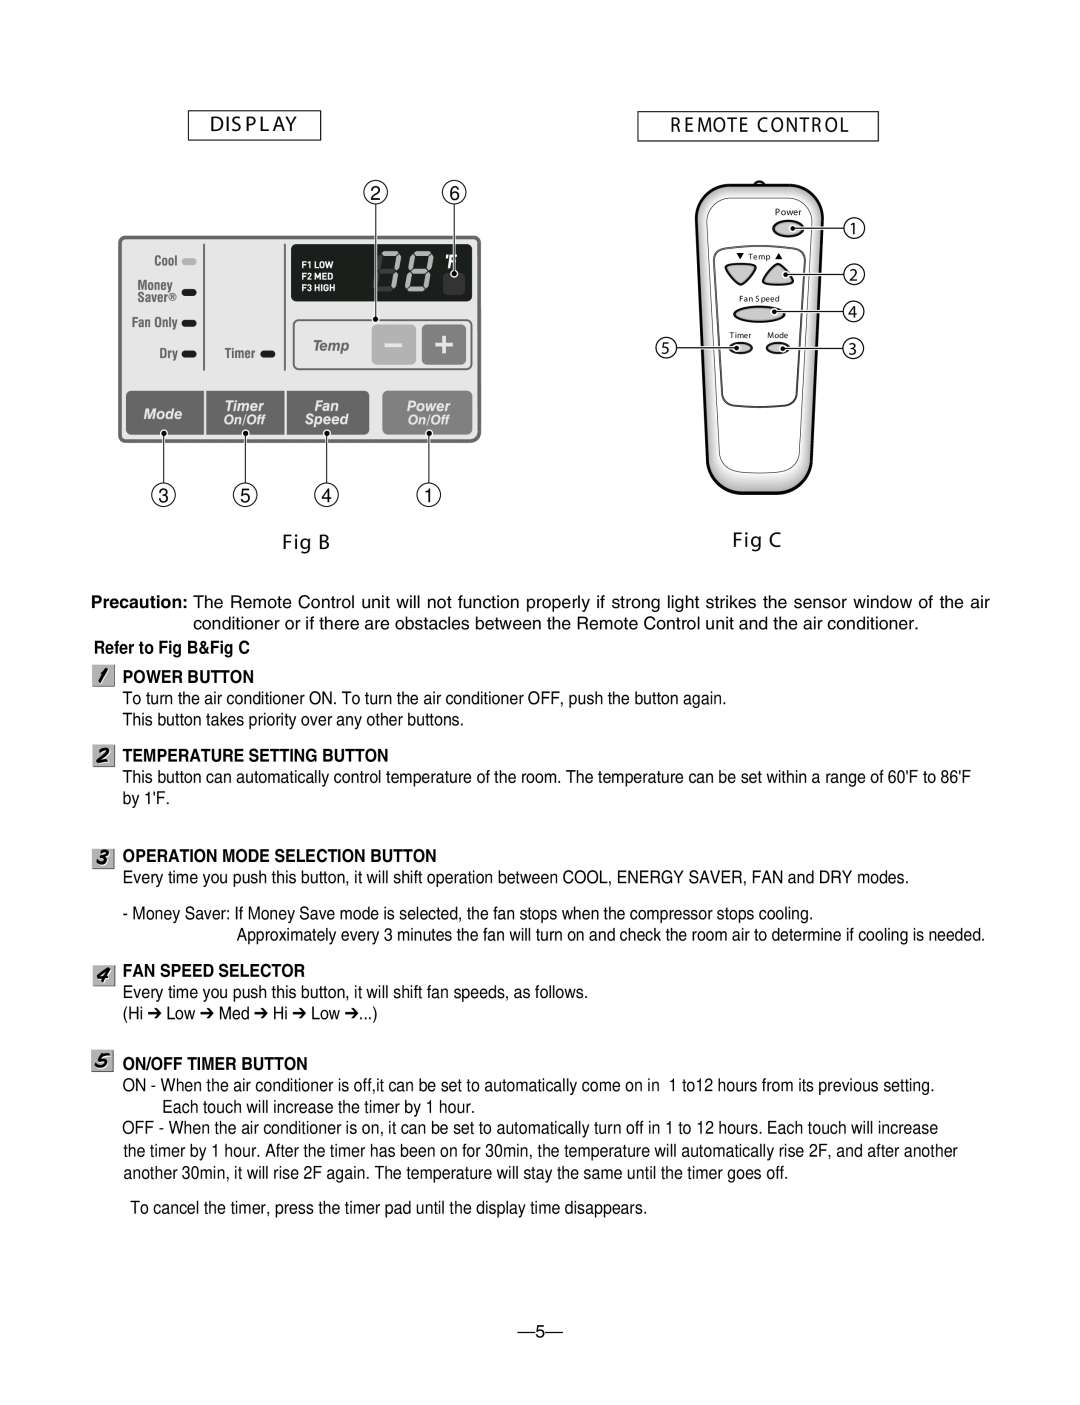 Friedrich ZQ08B10 Dis P L Ay, R E Mote C Ontr Ol, Refer to Fig B&Fig C POWER BUTTON, Temperature Setting Button 